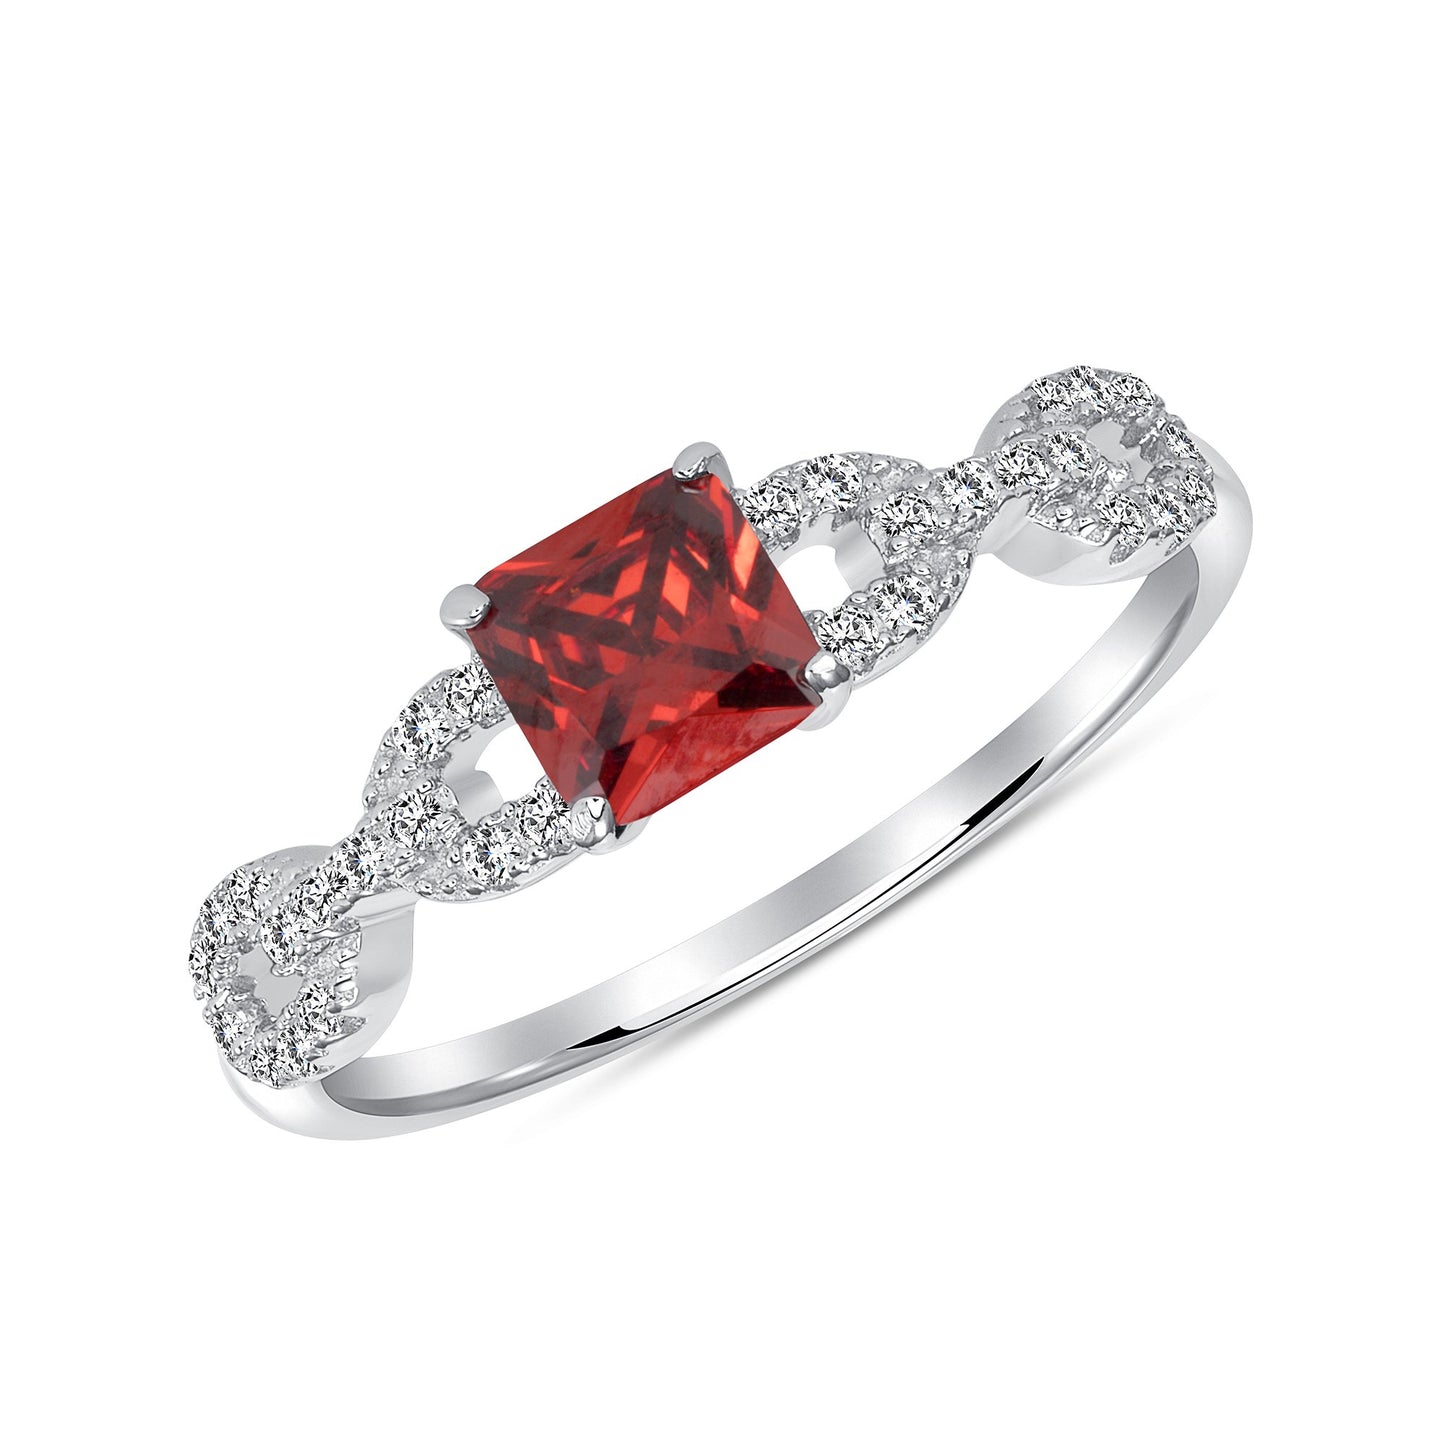 DGR1672RED. Silver 925 Garnet Solitaire Ring